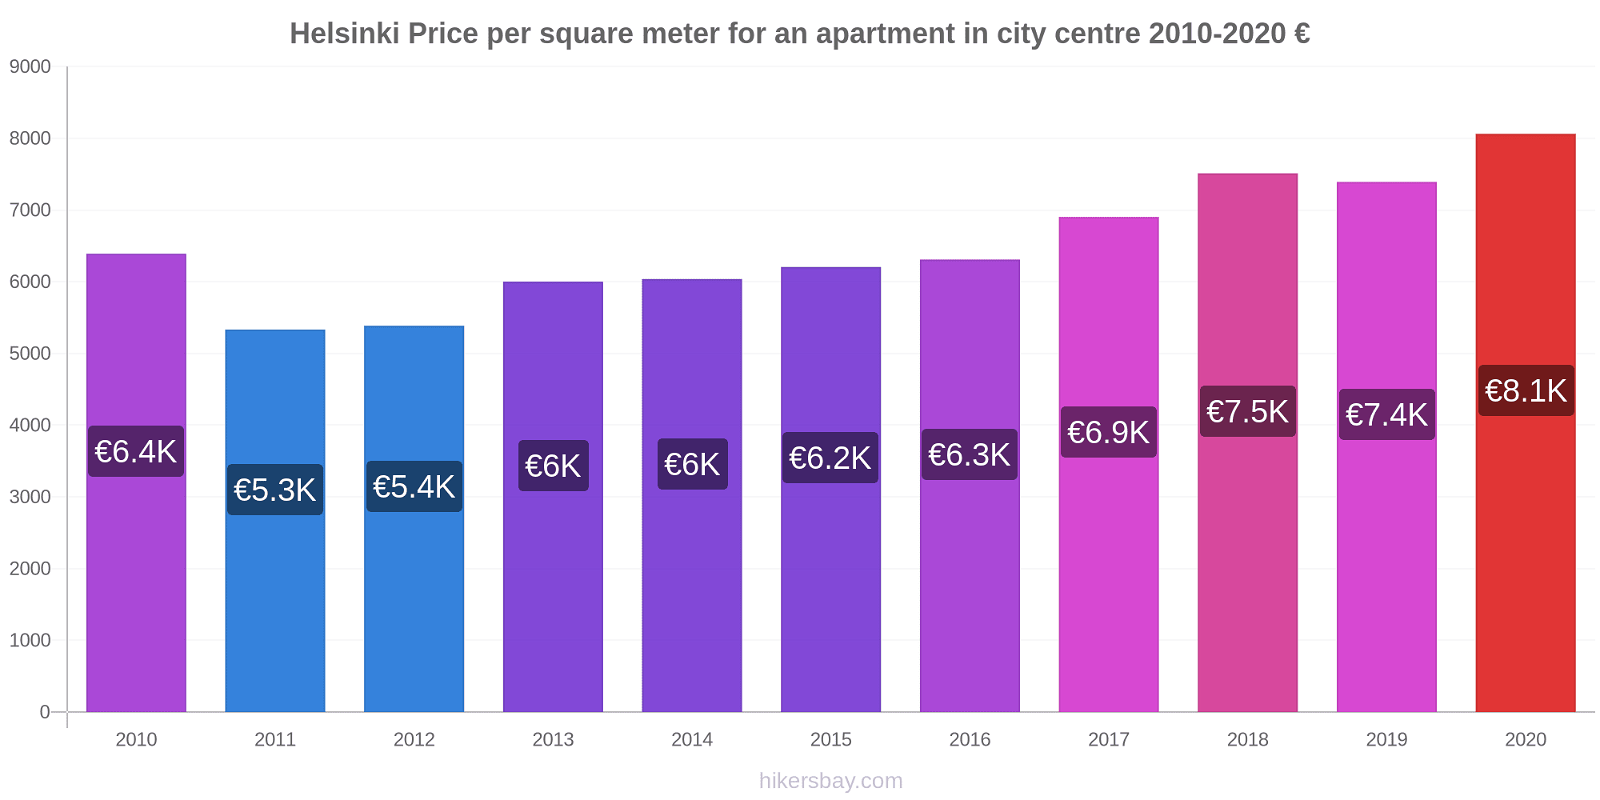 Helsinki price changes Price per square meter for an apartment in city centre hikersbay.com